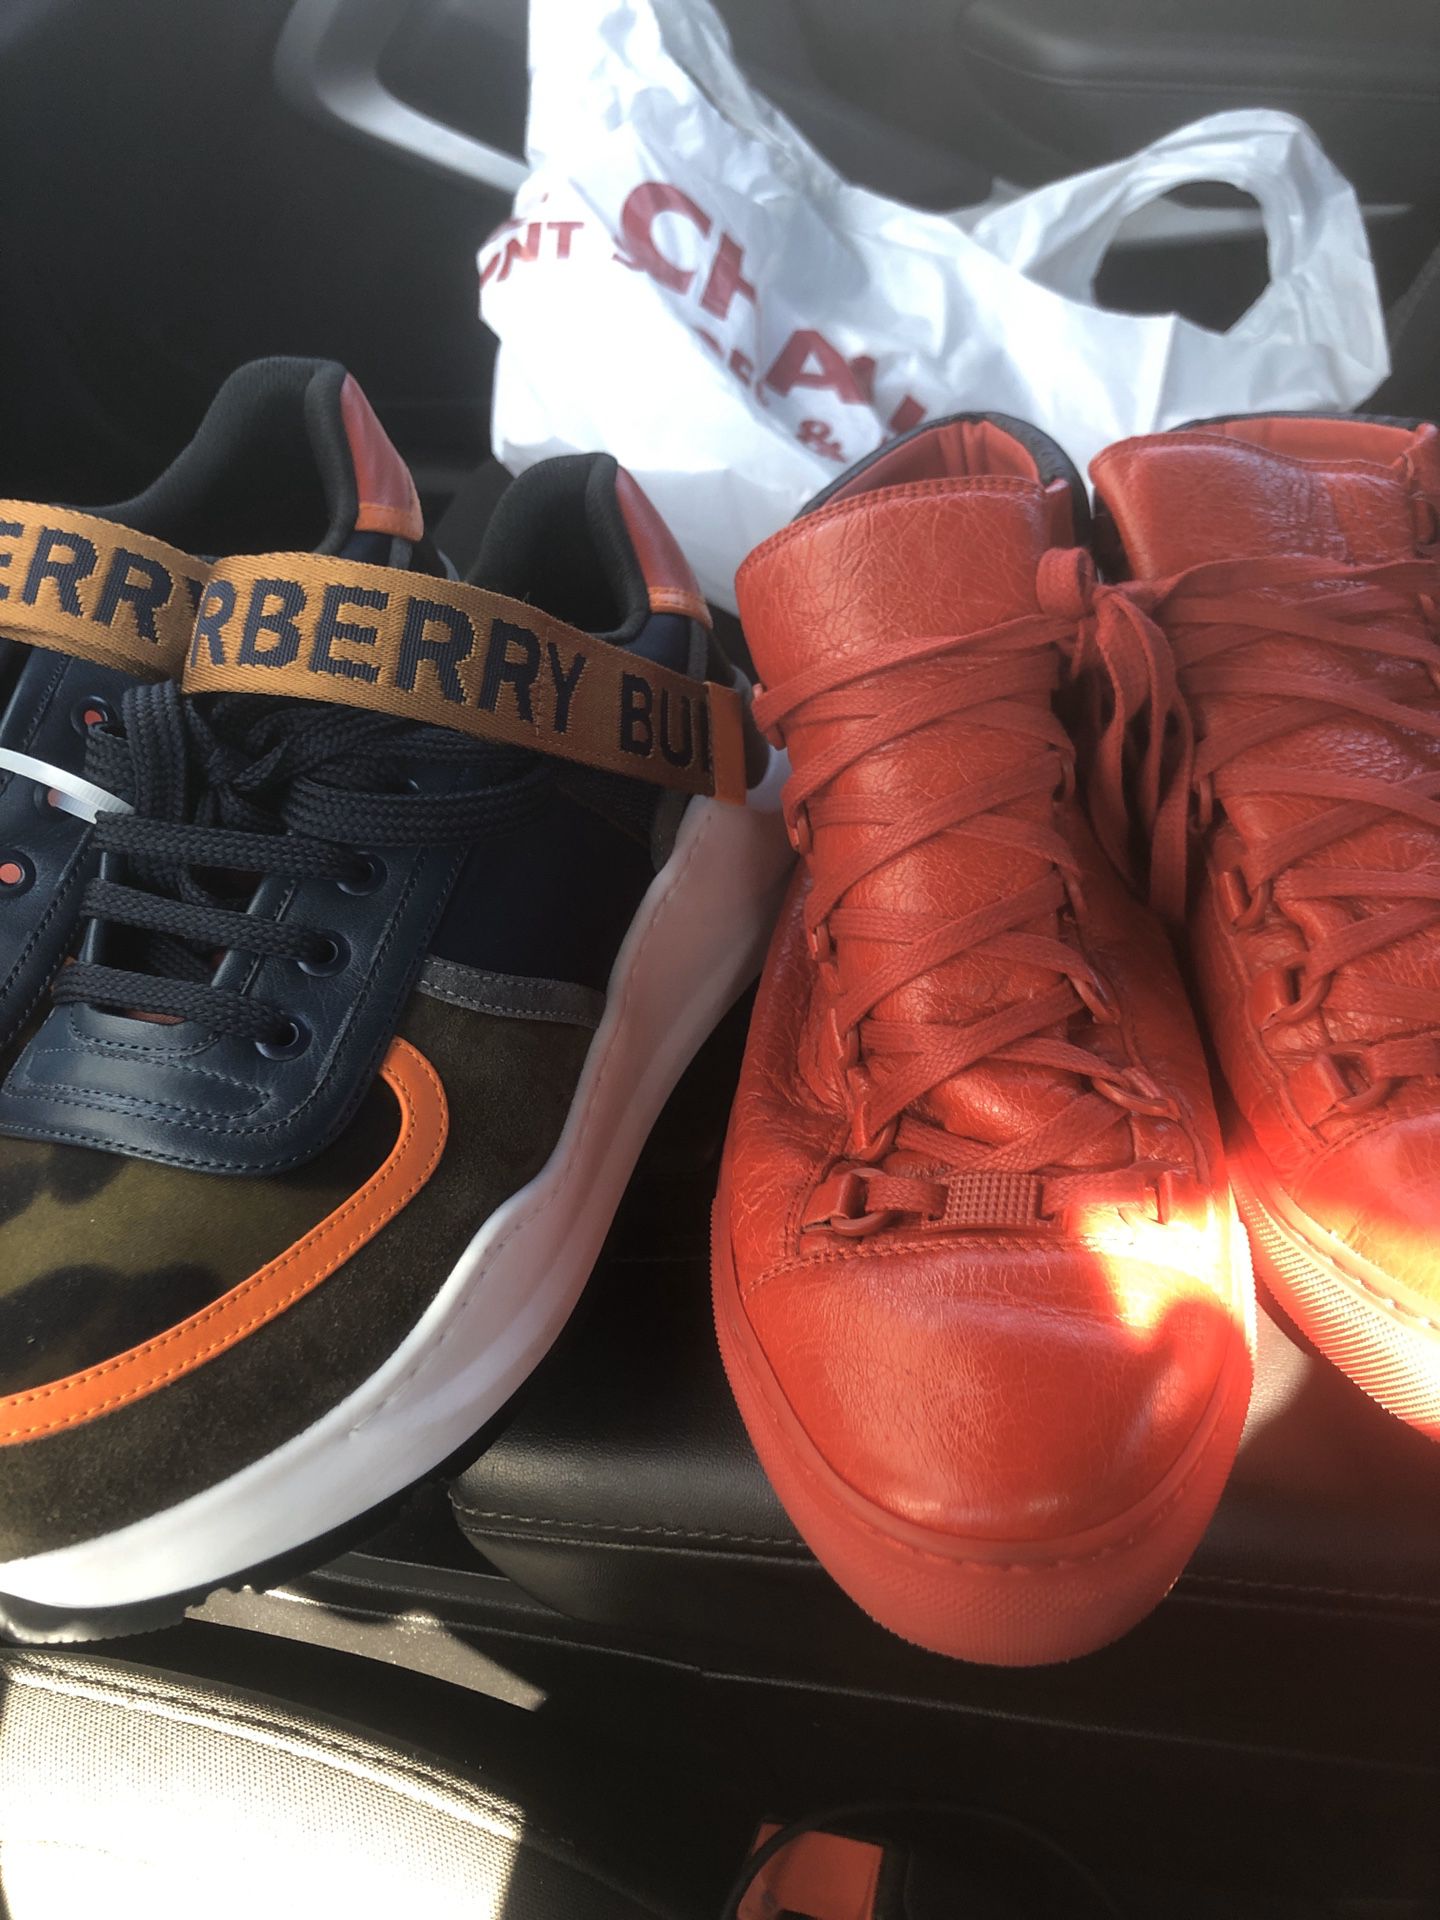 Burberry and balenciagas shoes